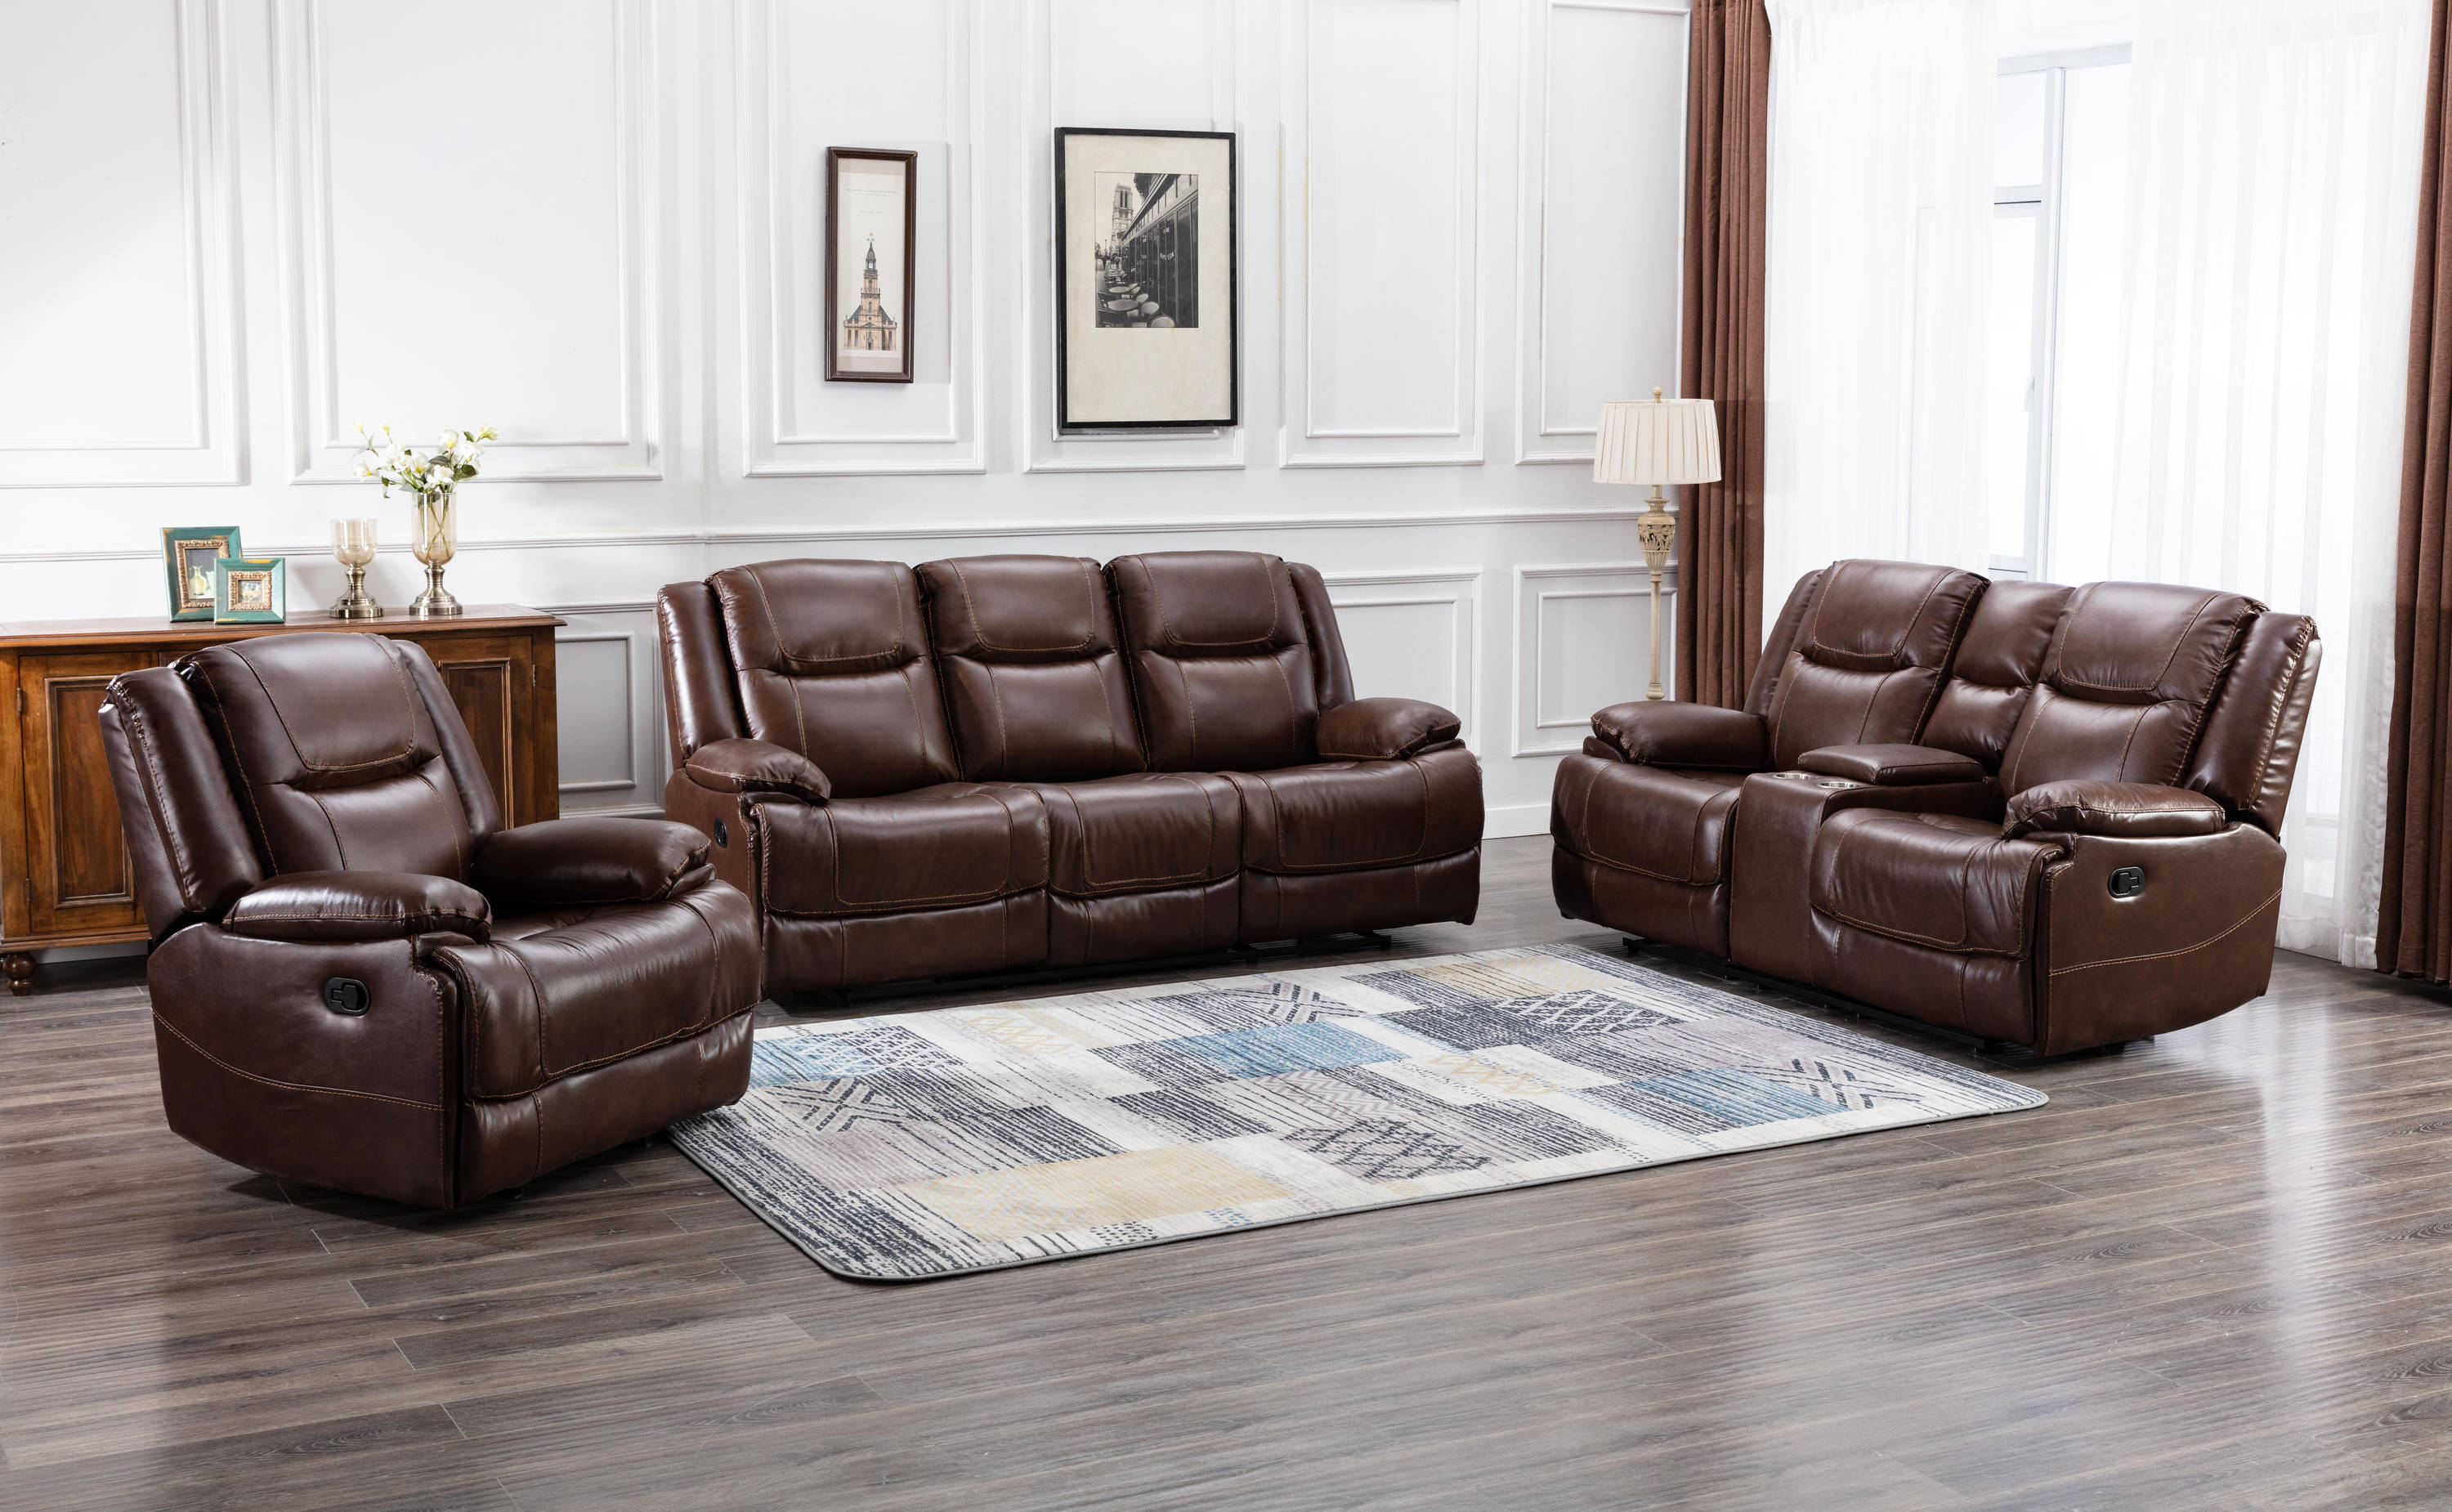 Leather Recliners at Lowes.com